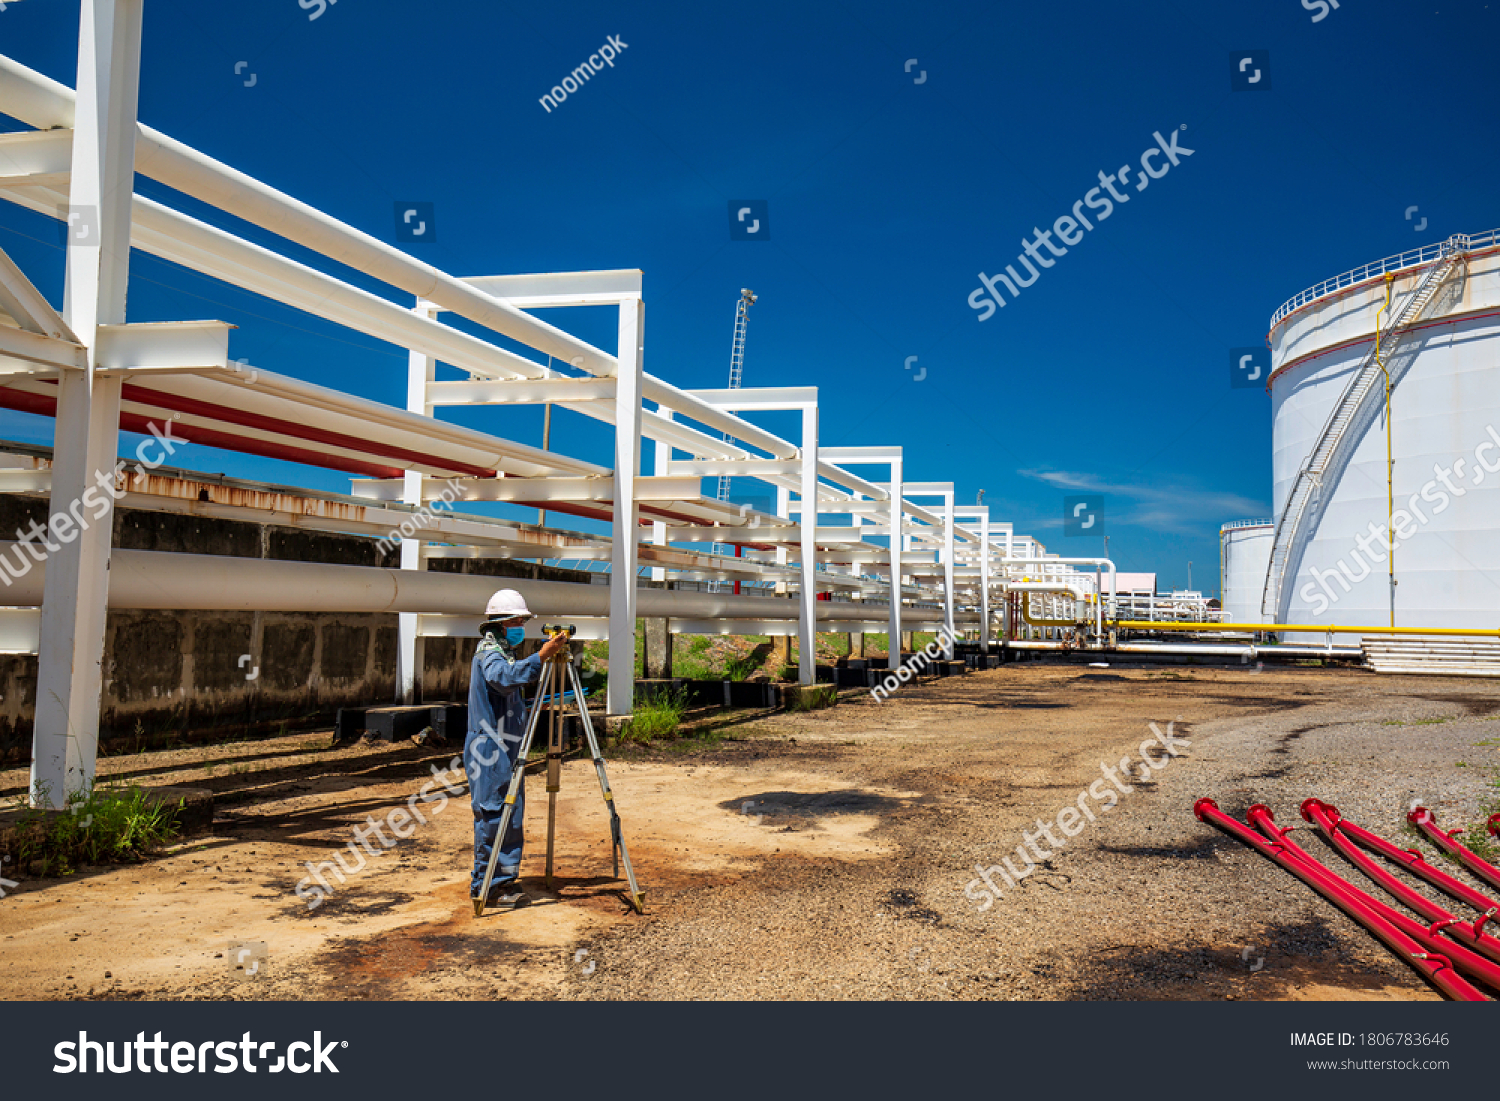 Stock Photo Male Worker Survey Camera Inspection Visual Pipeline Oil And Gas Steam Pipeline Industry 1806783646